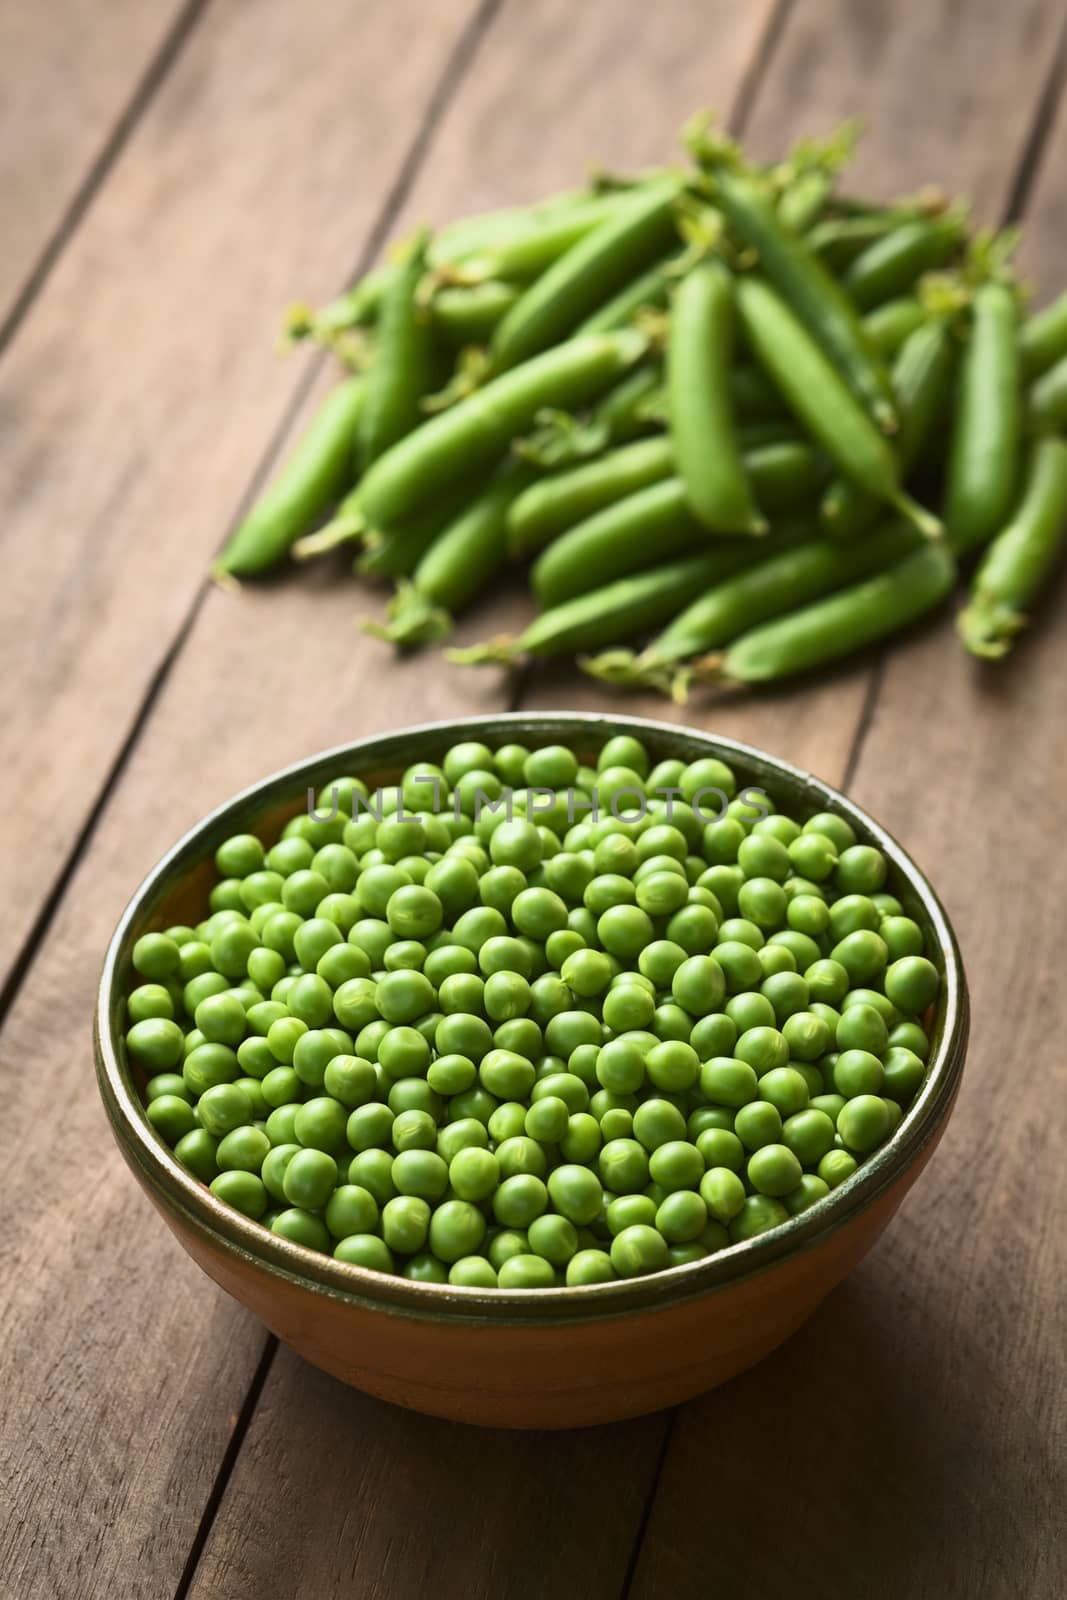 Peas (lat. Pisum sativum) in bowl with closed peapods in the back (Selective Focus, Focus into the middle of the peas)